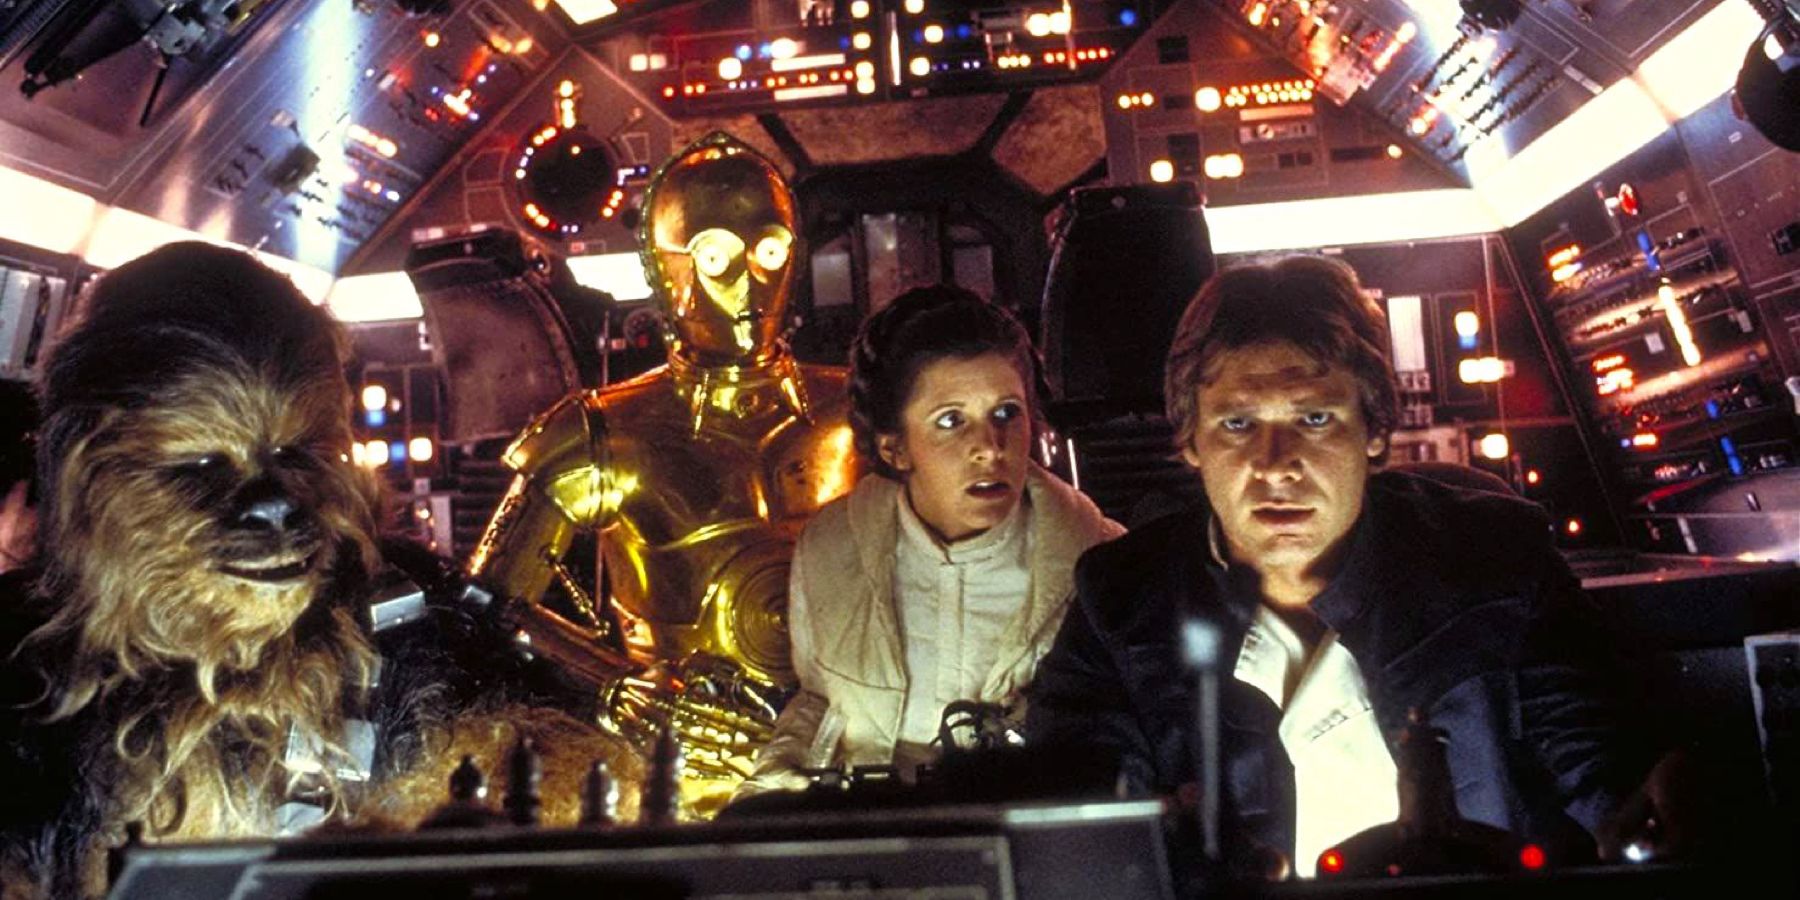 Chewbacca, C-3PO, Princess Leia, and Han Solo man the cockpit in Star Wars: Episode V - The Empire Strikes Back.